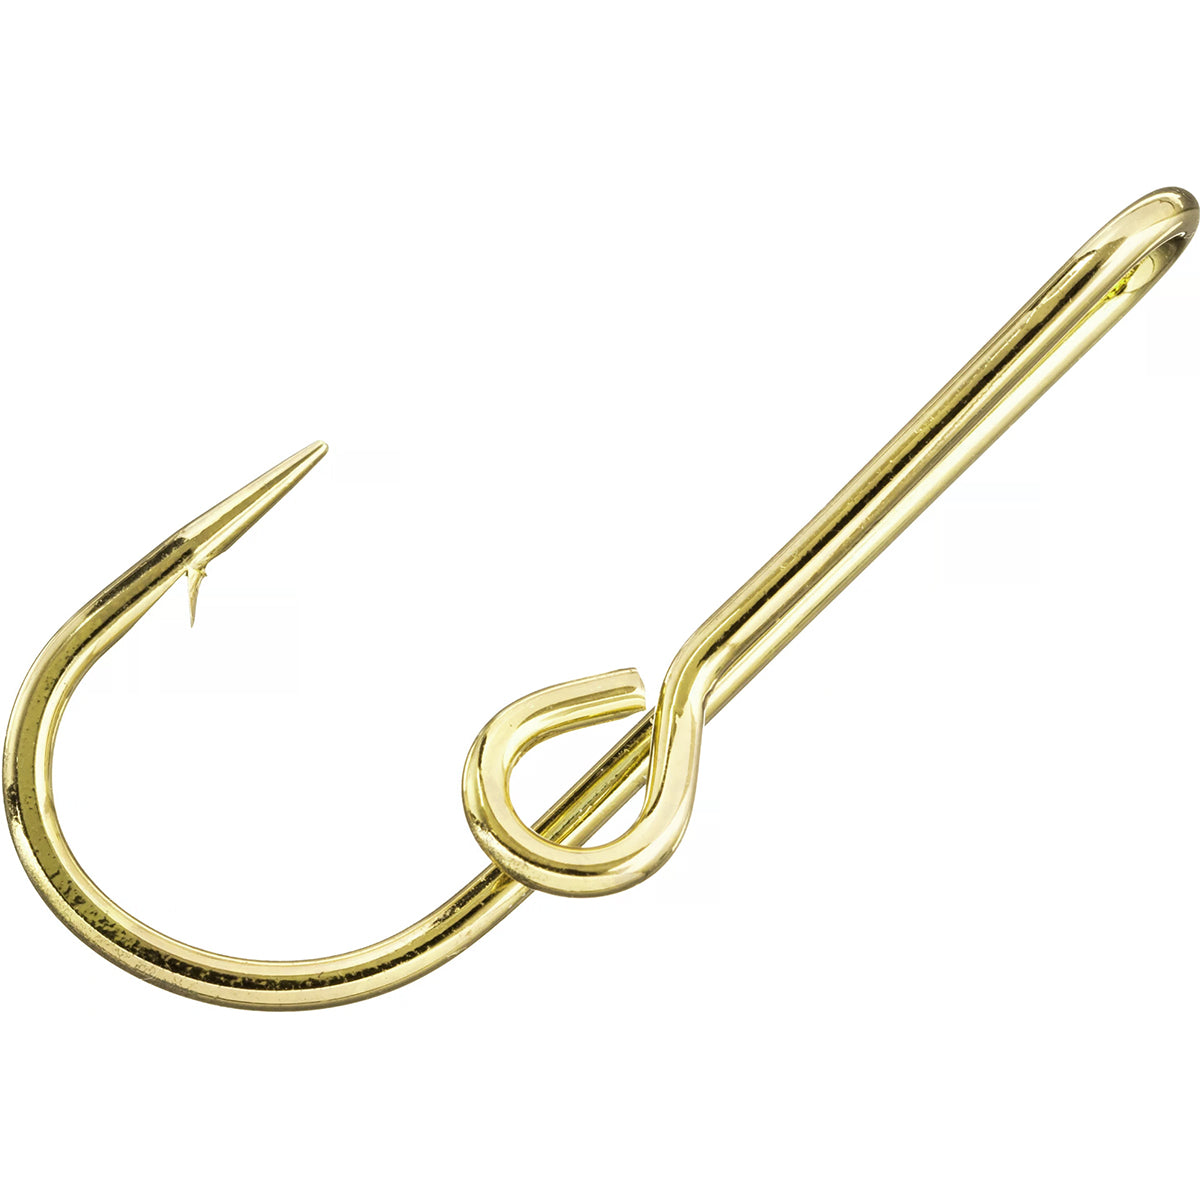 Eagle Claw Tie/Hat Clip - Gold Eagle Claw